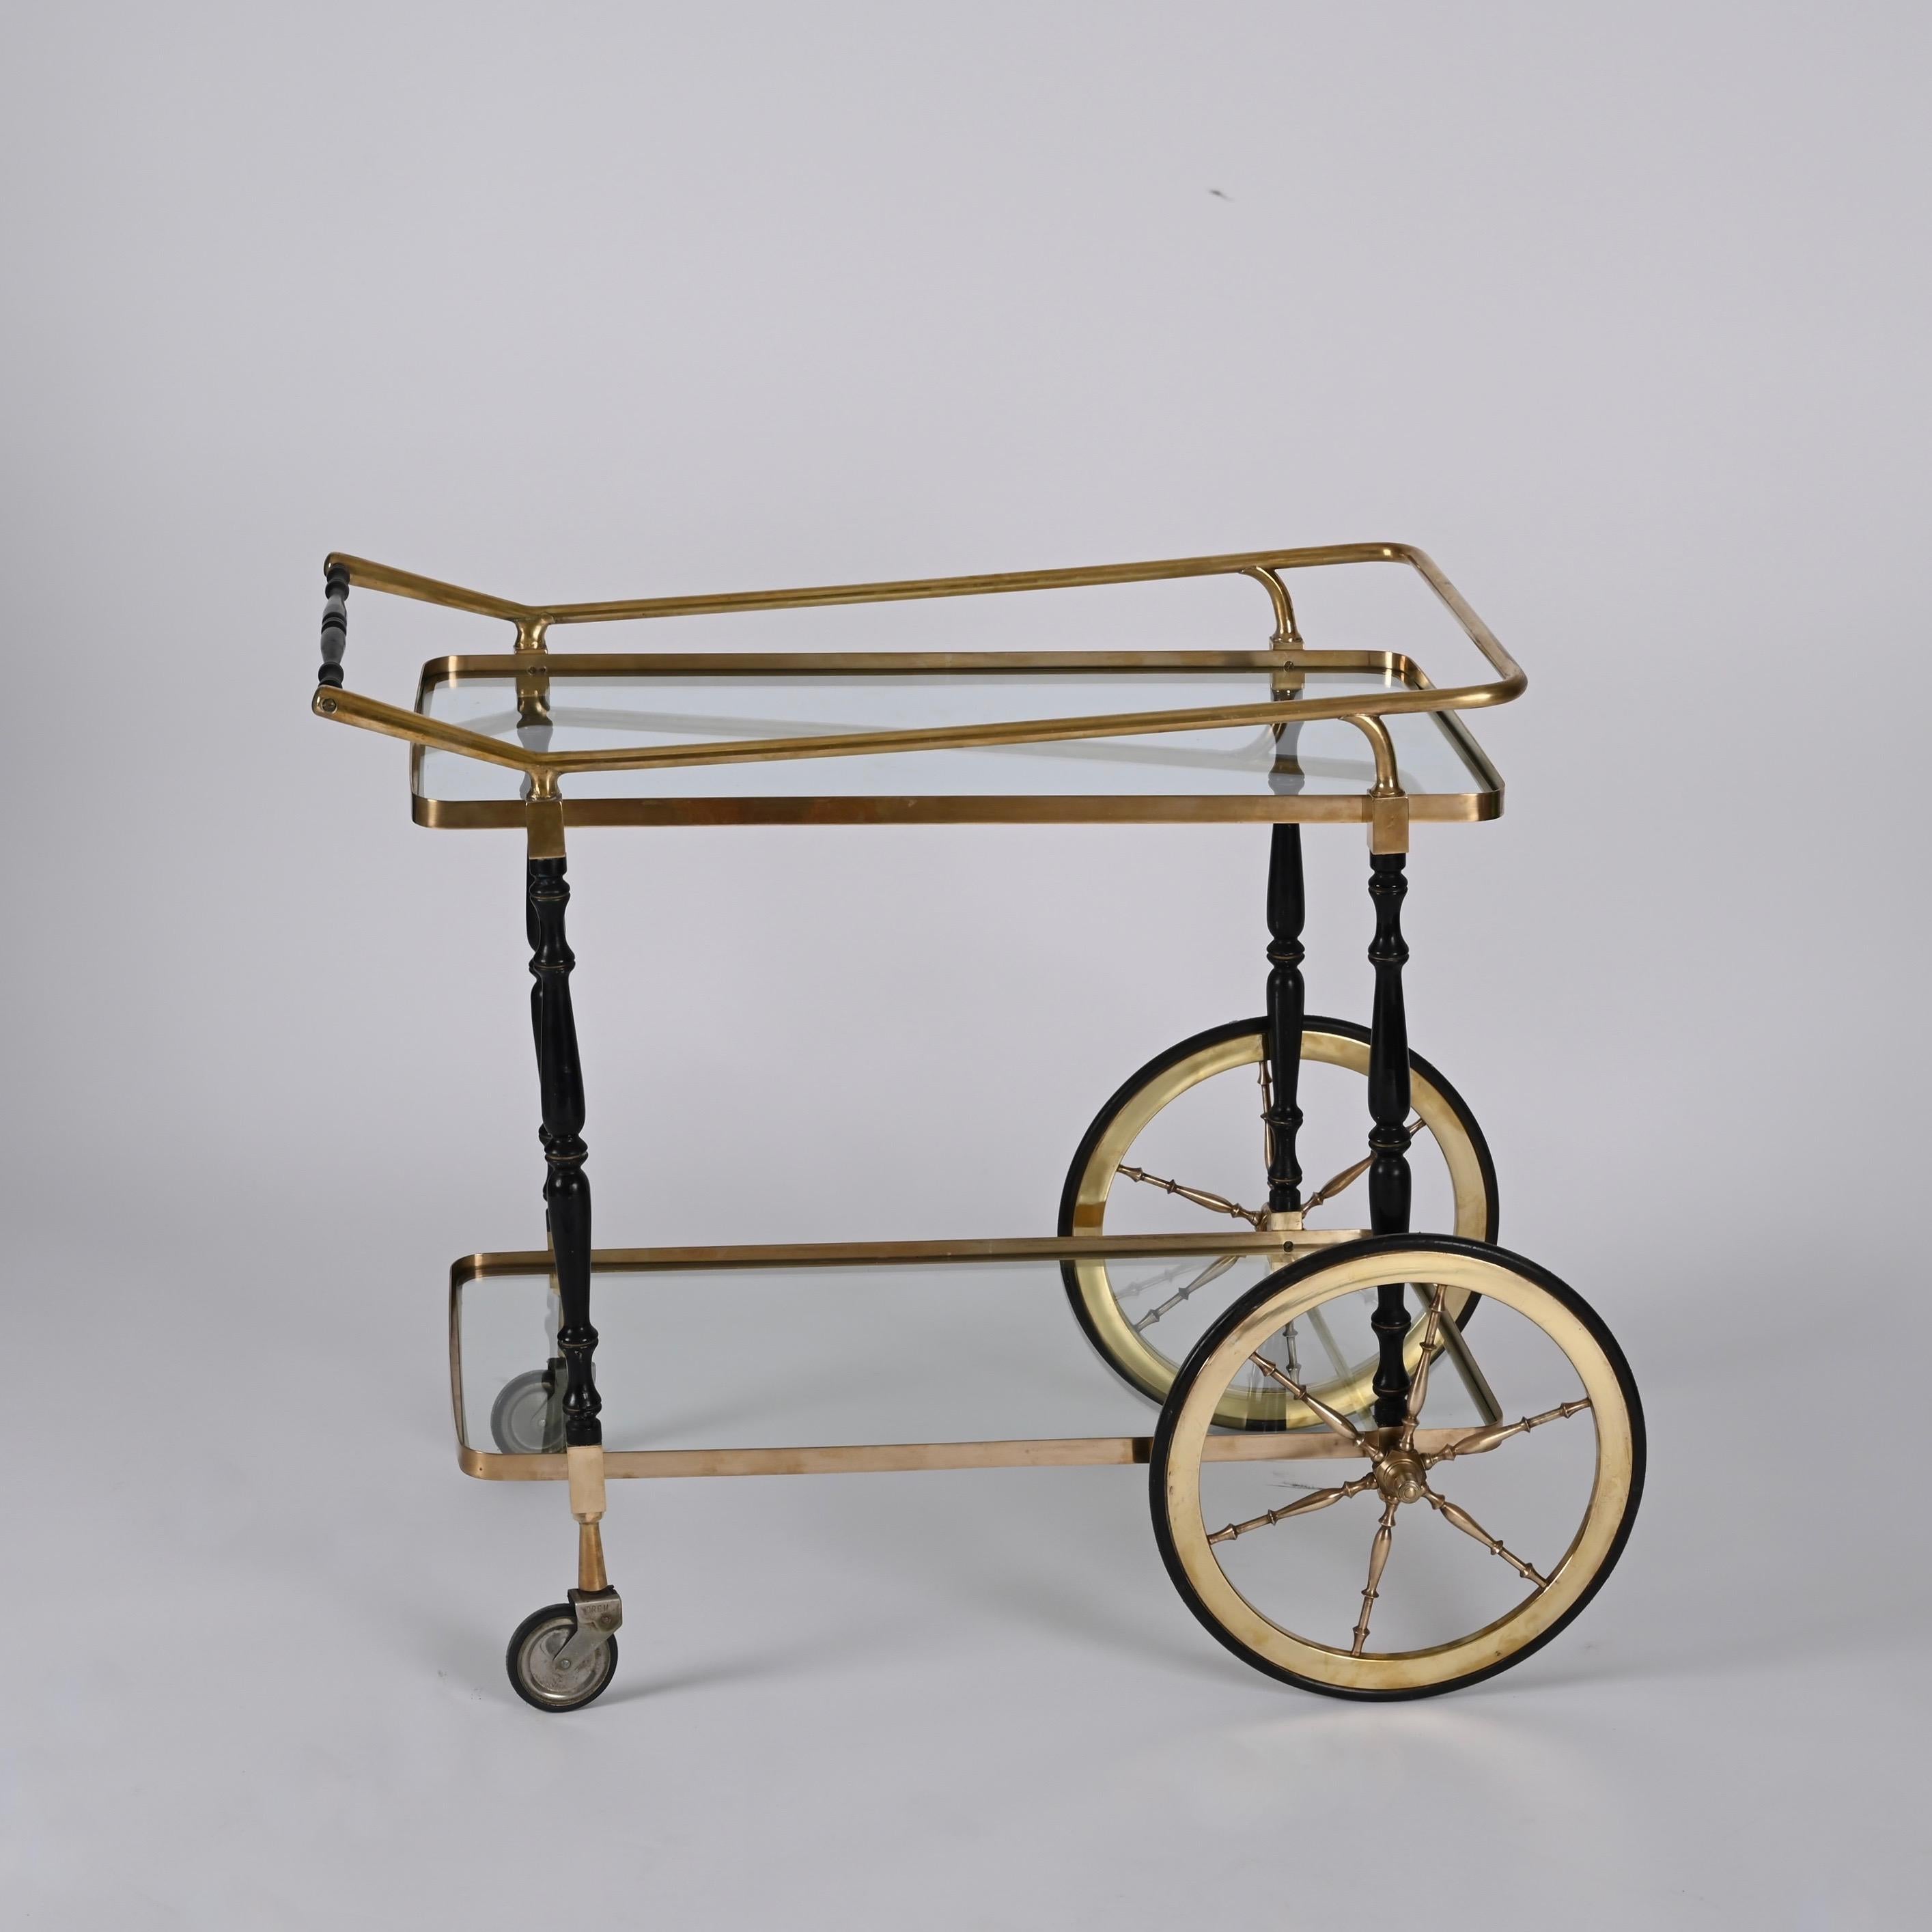 Midcentury Cesare Lacca Brass and Black Lacquer Wood Italian Bar Cart, 1950s For Sale 7